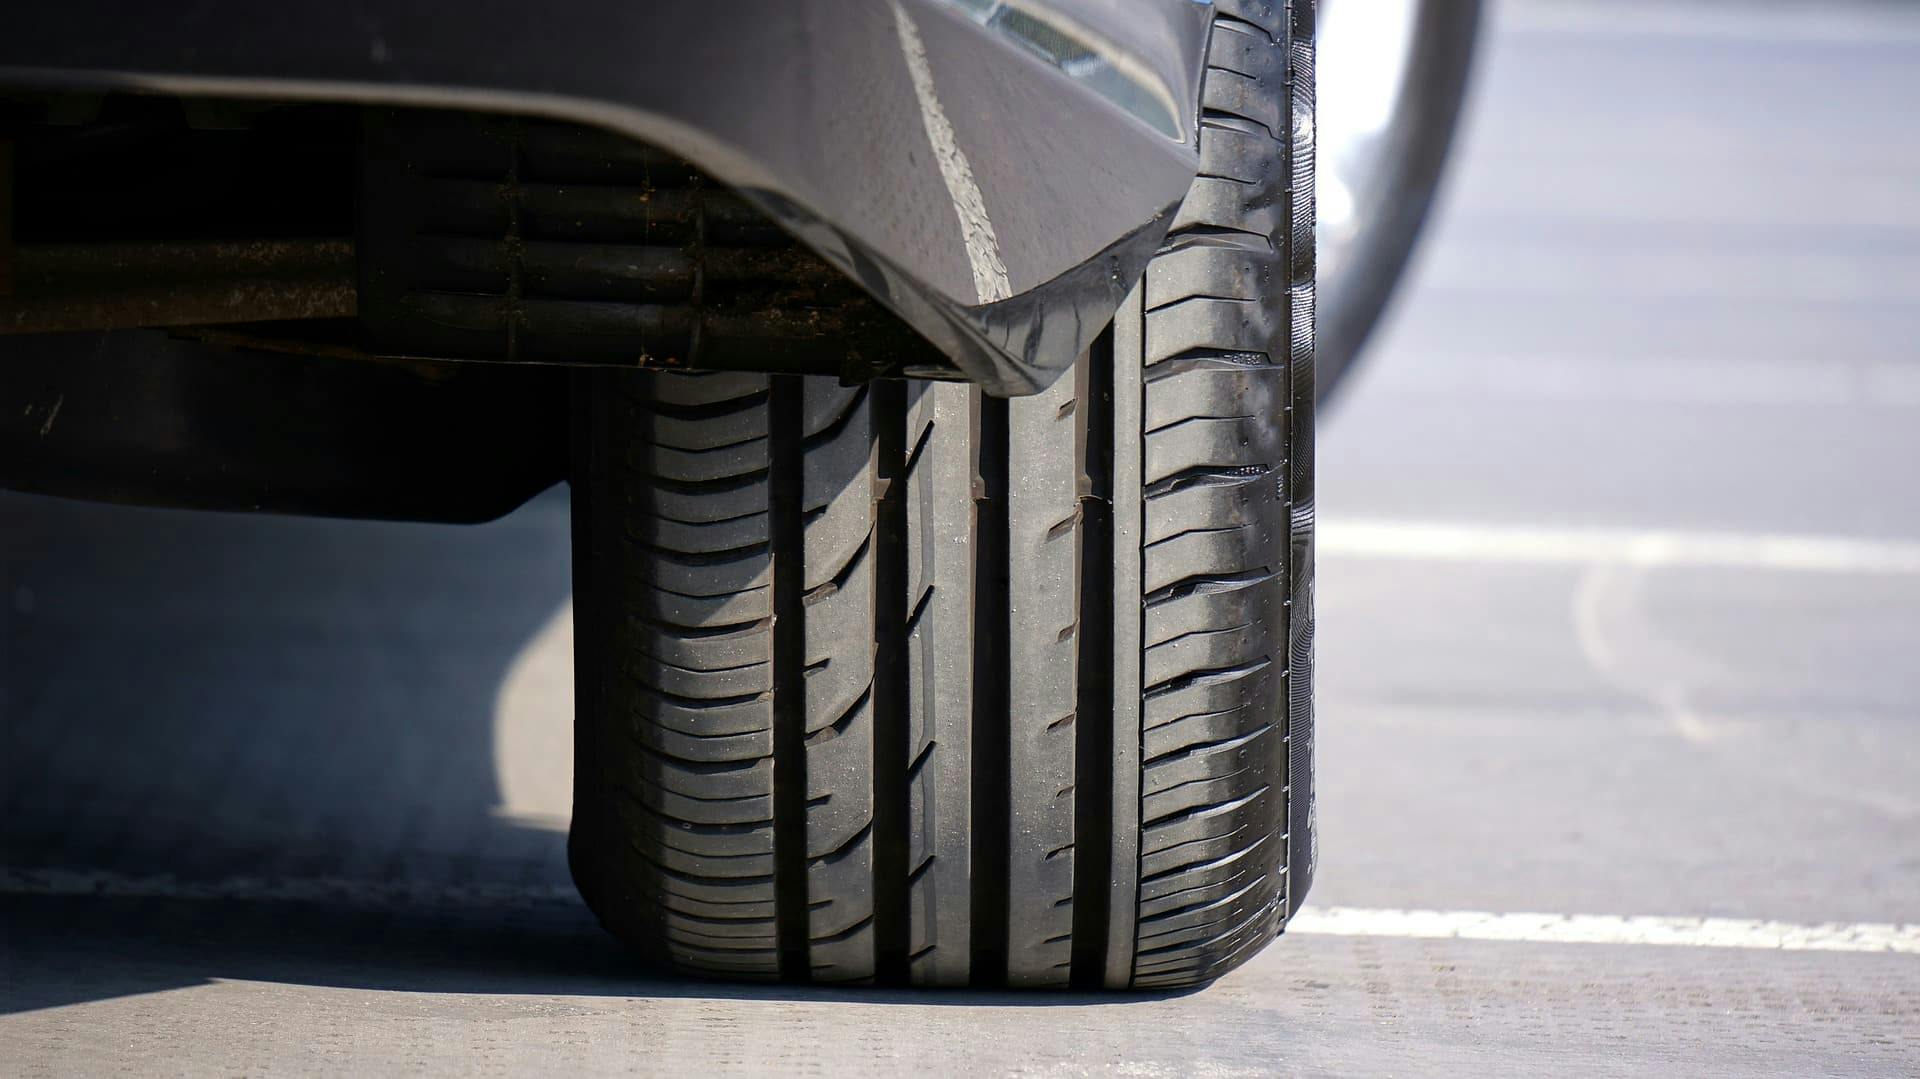 A detailed view of a car tire, showcasing its tread pattern and texture, ready to hit the road.